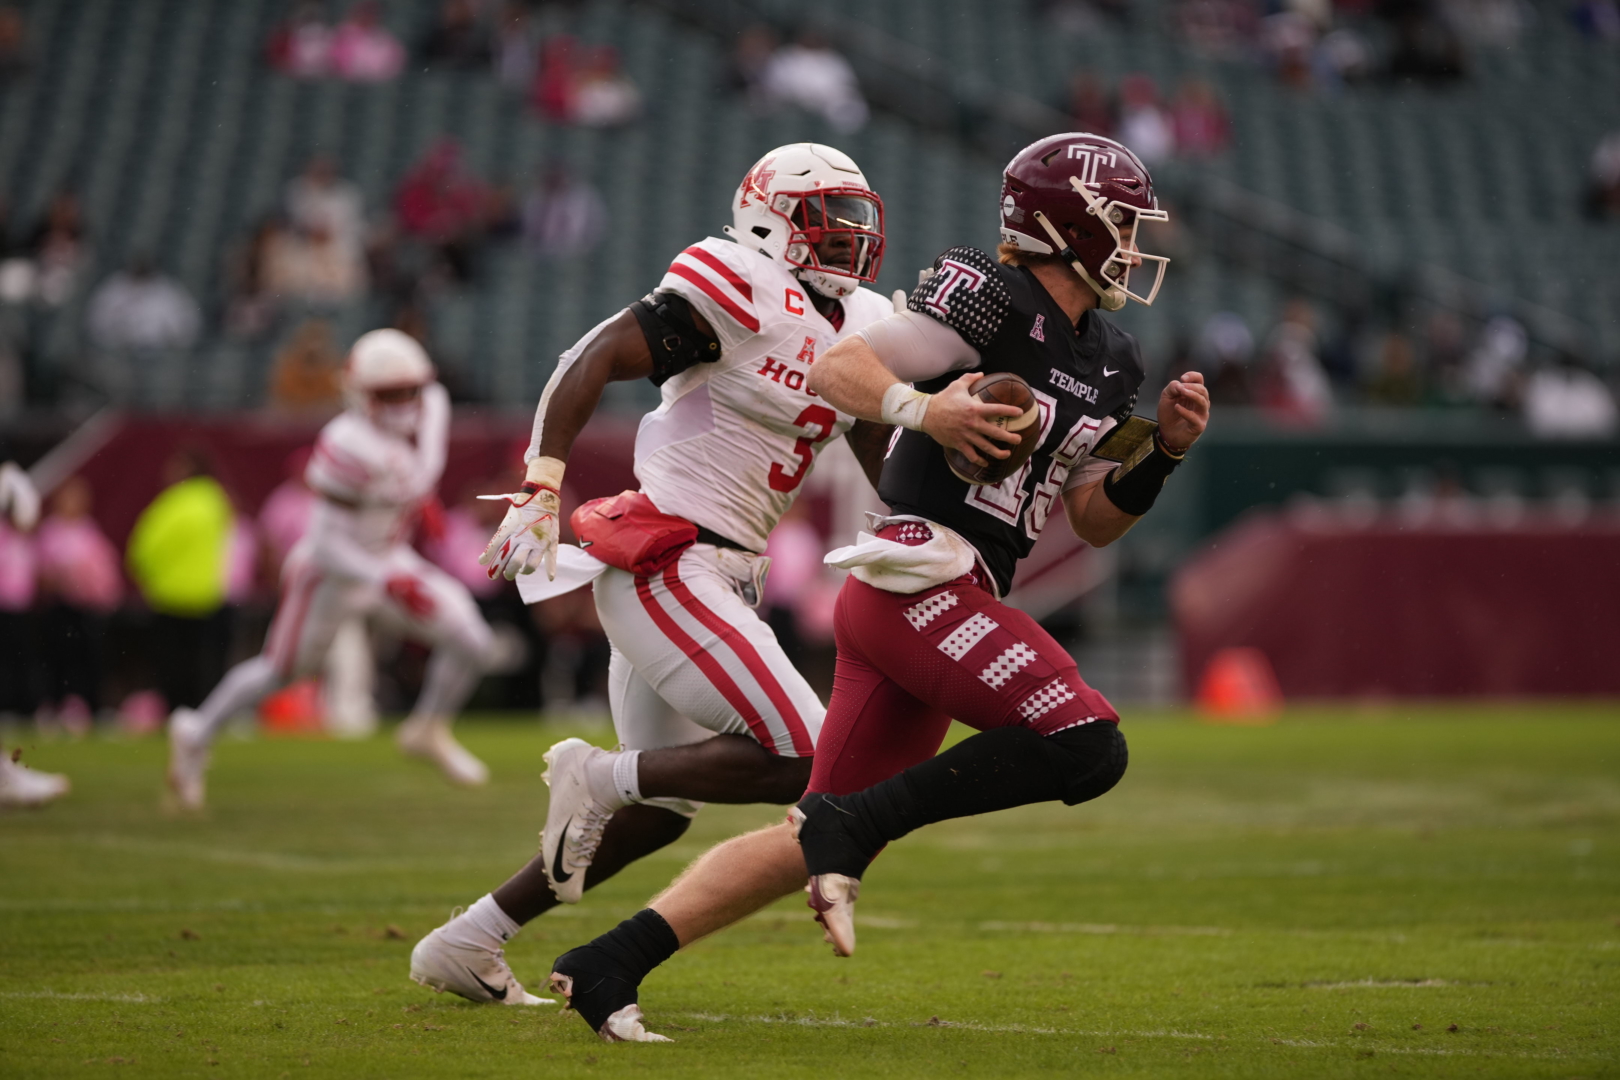 Junior linebacker Donavan Mutin was one of a few Cougars who spearheaded a team meeting after week one that the team says turned the 2021 UH football season around. | Courtesy of UH athletics